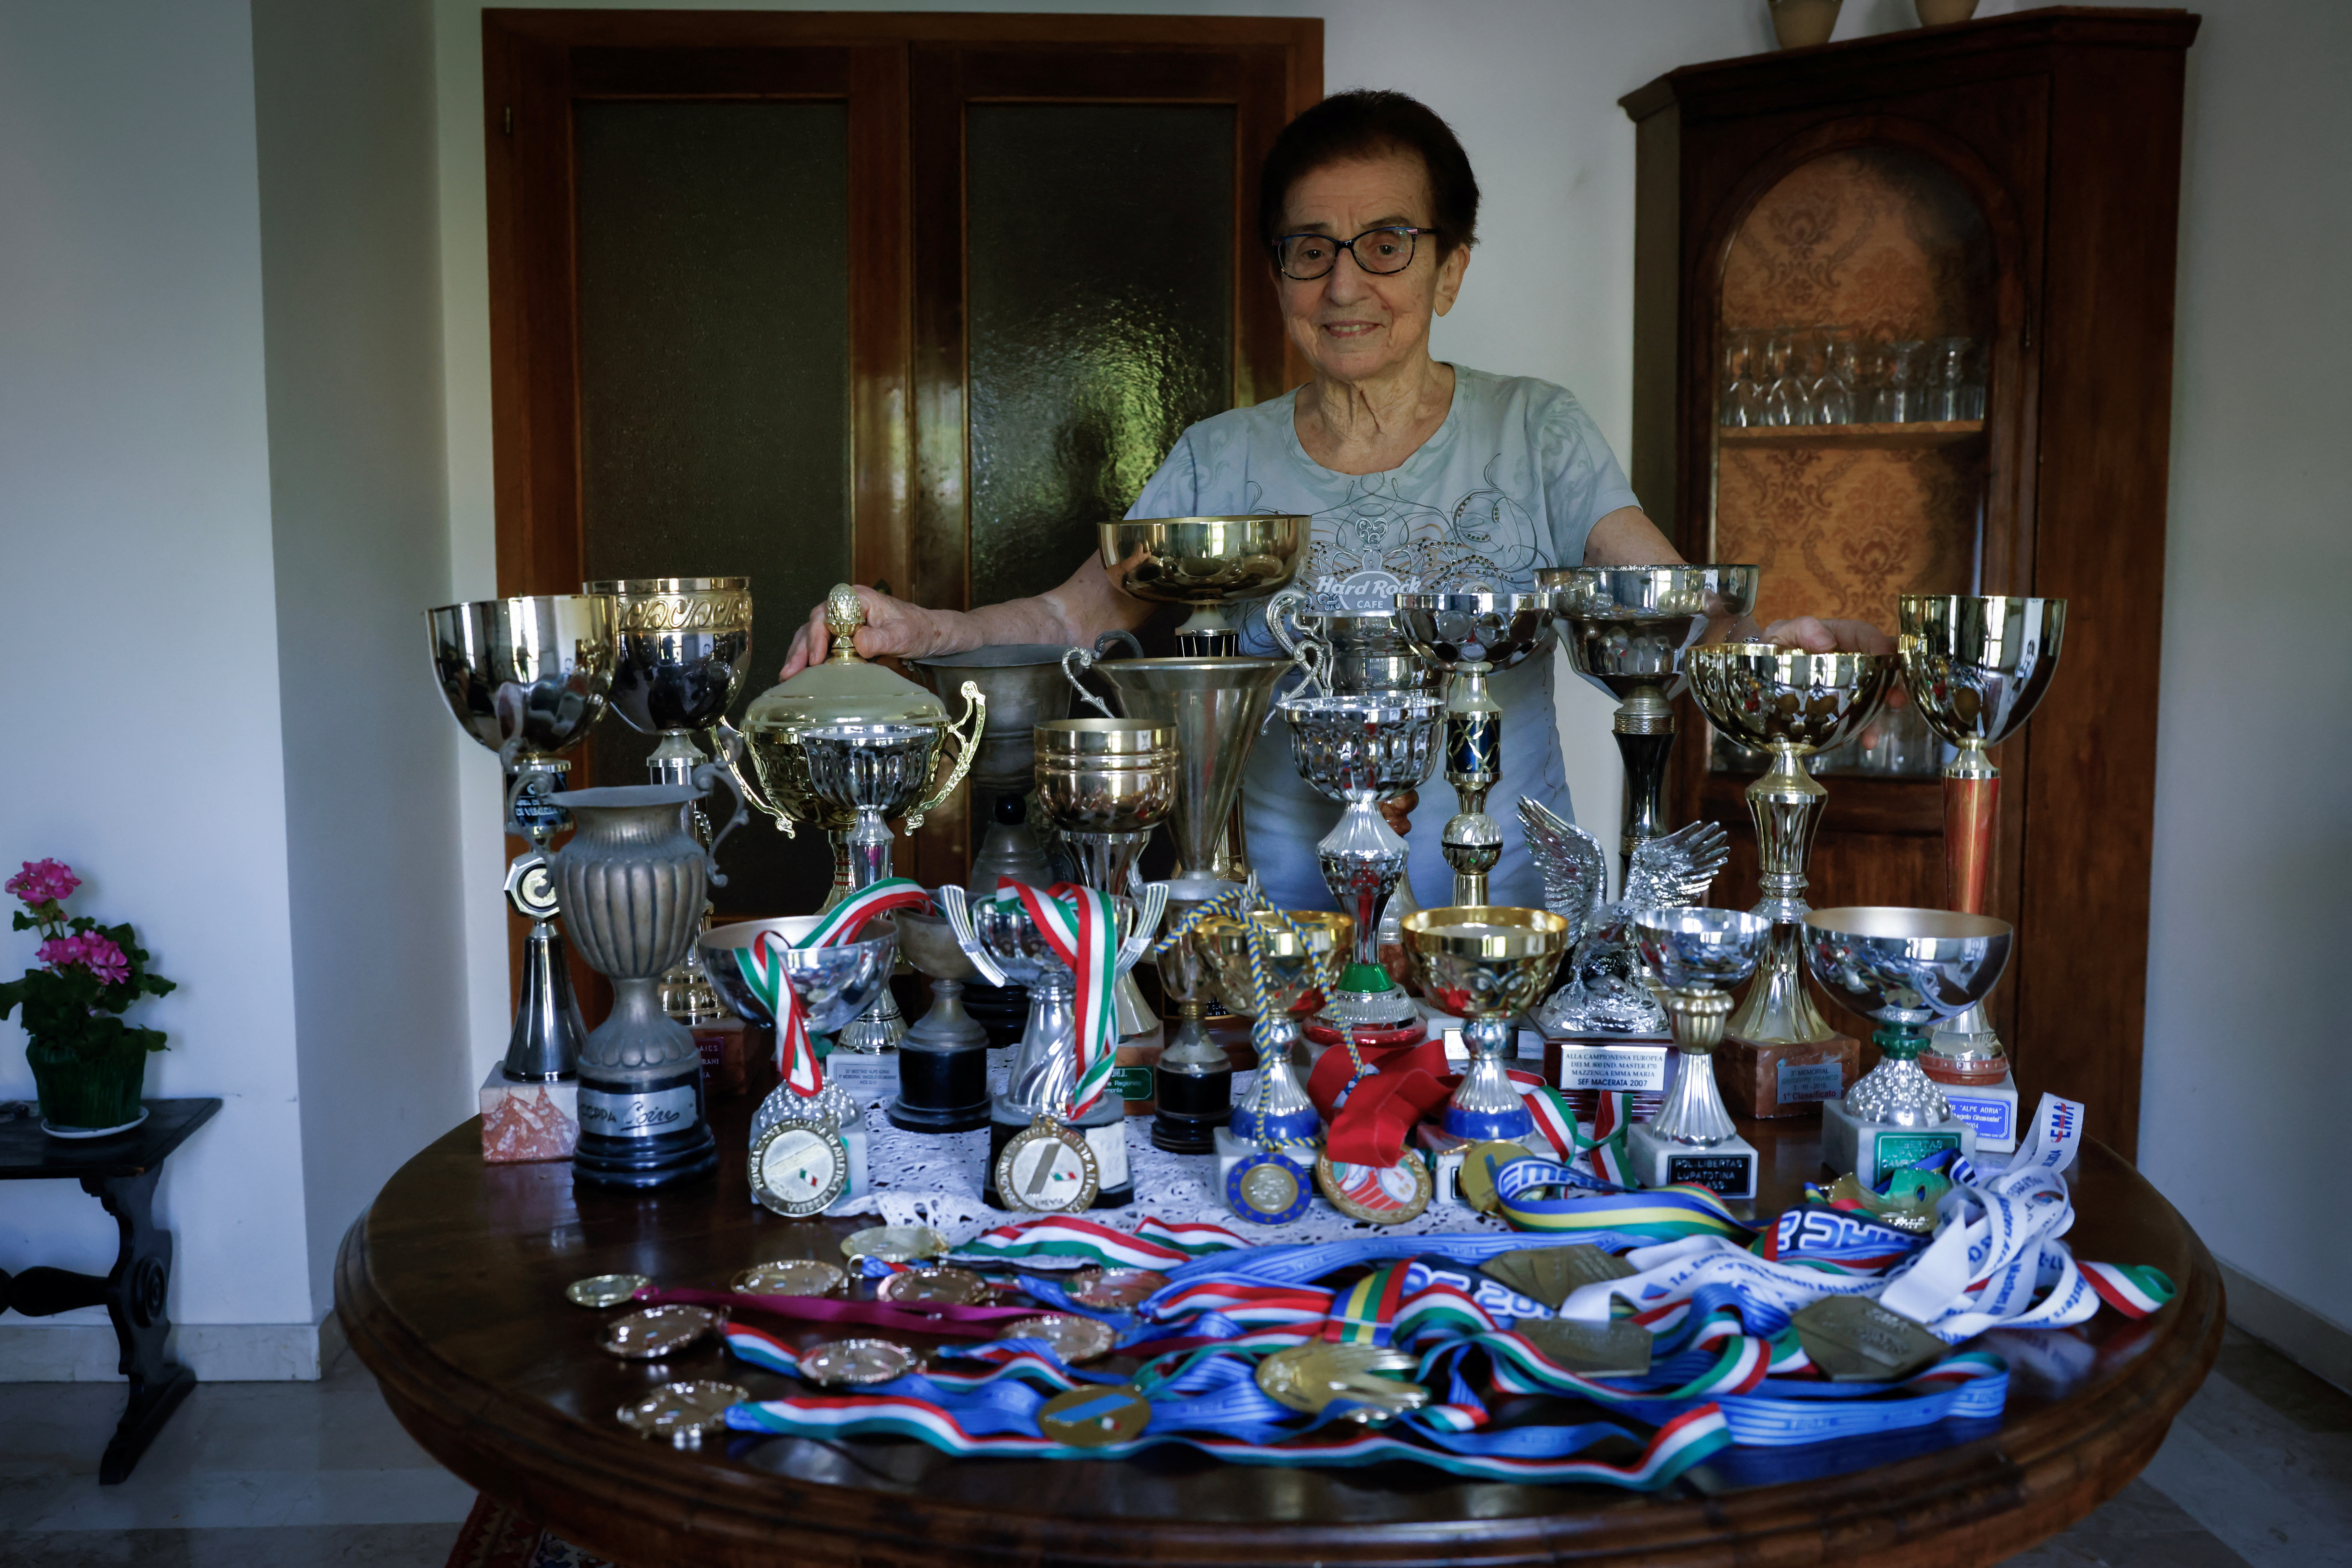 Italian master runner Emma Maria Mazzenga, 90, poses for a picture with some of her trophies, at home in Padua. /Remo Casilli/Reuters